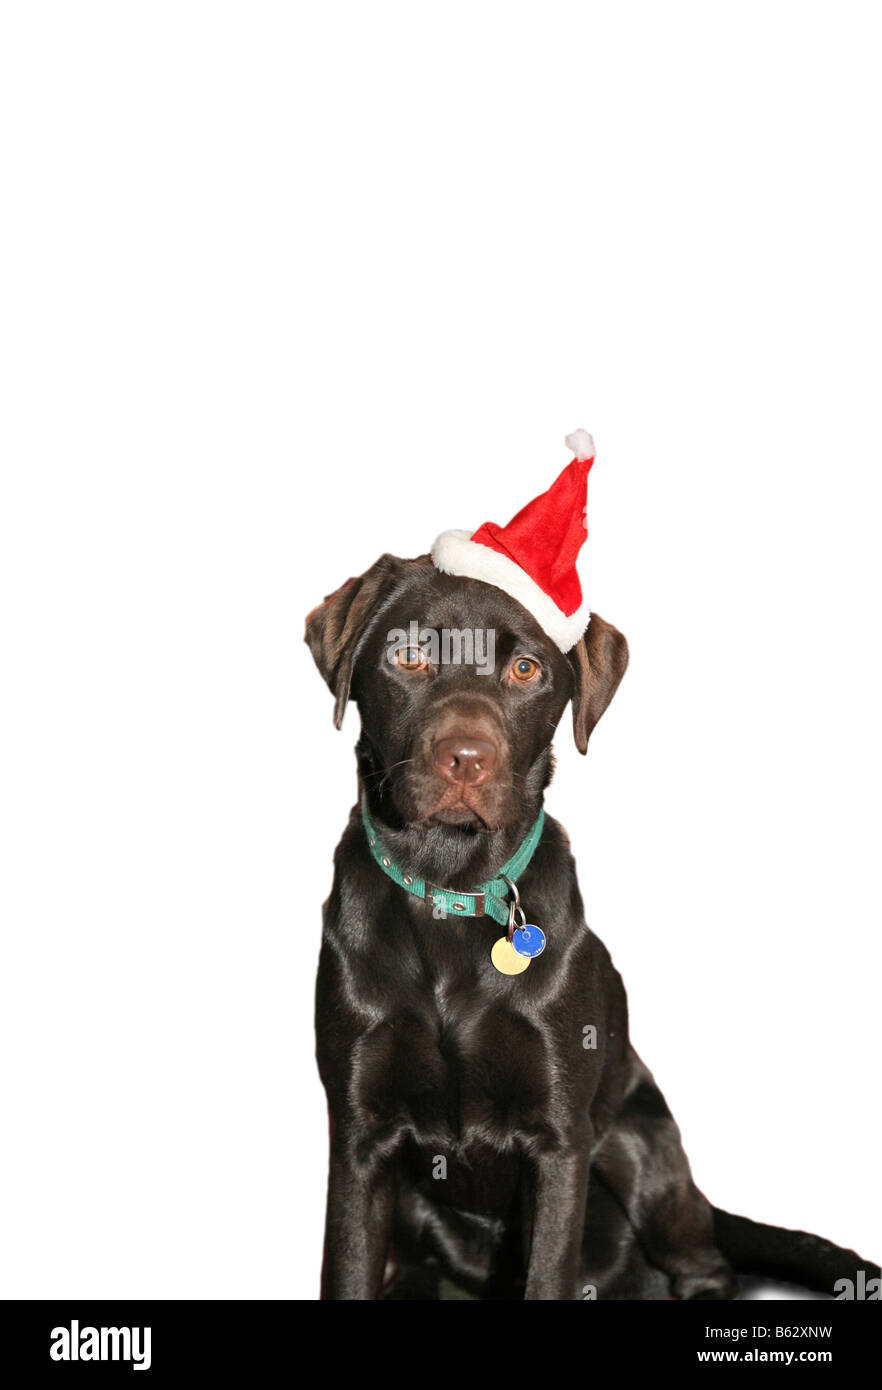 A chocolate brown labrador dog in a santa hat against a snow white background at Christmas Stock Photo